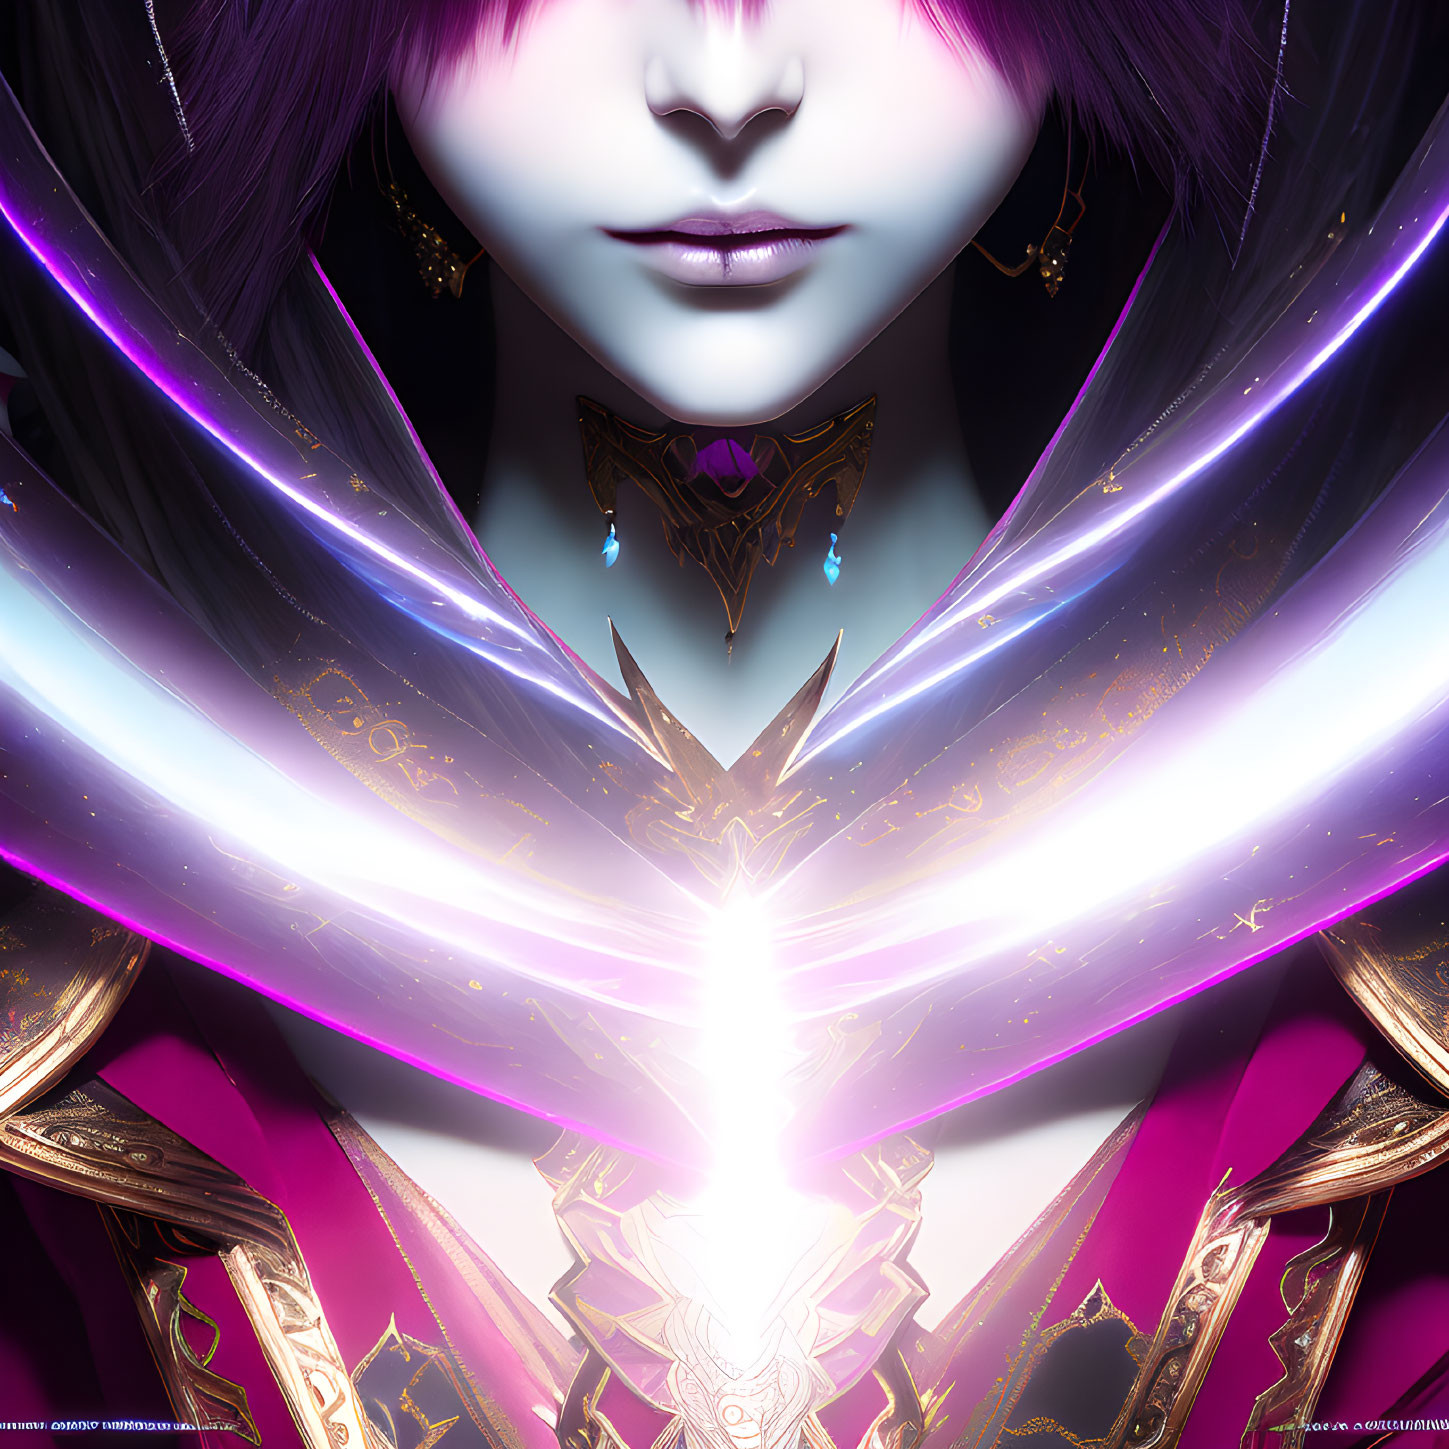 Fantasy character with glowing purple eyes and ornate golden armor